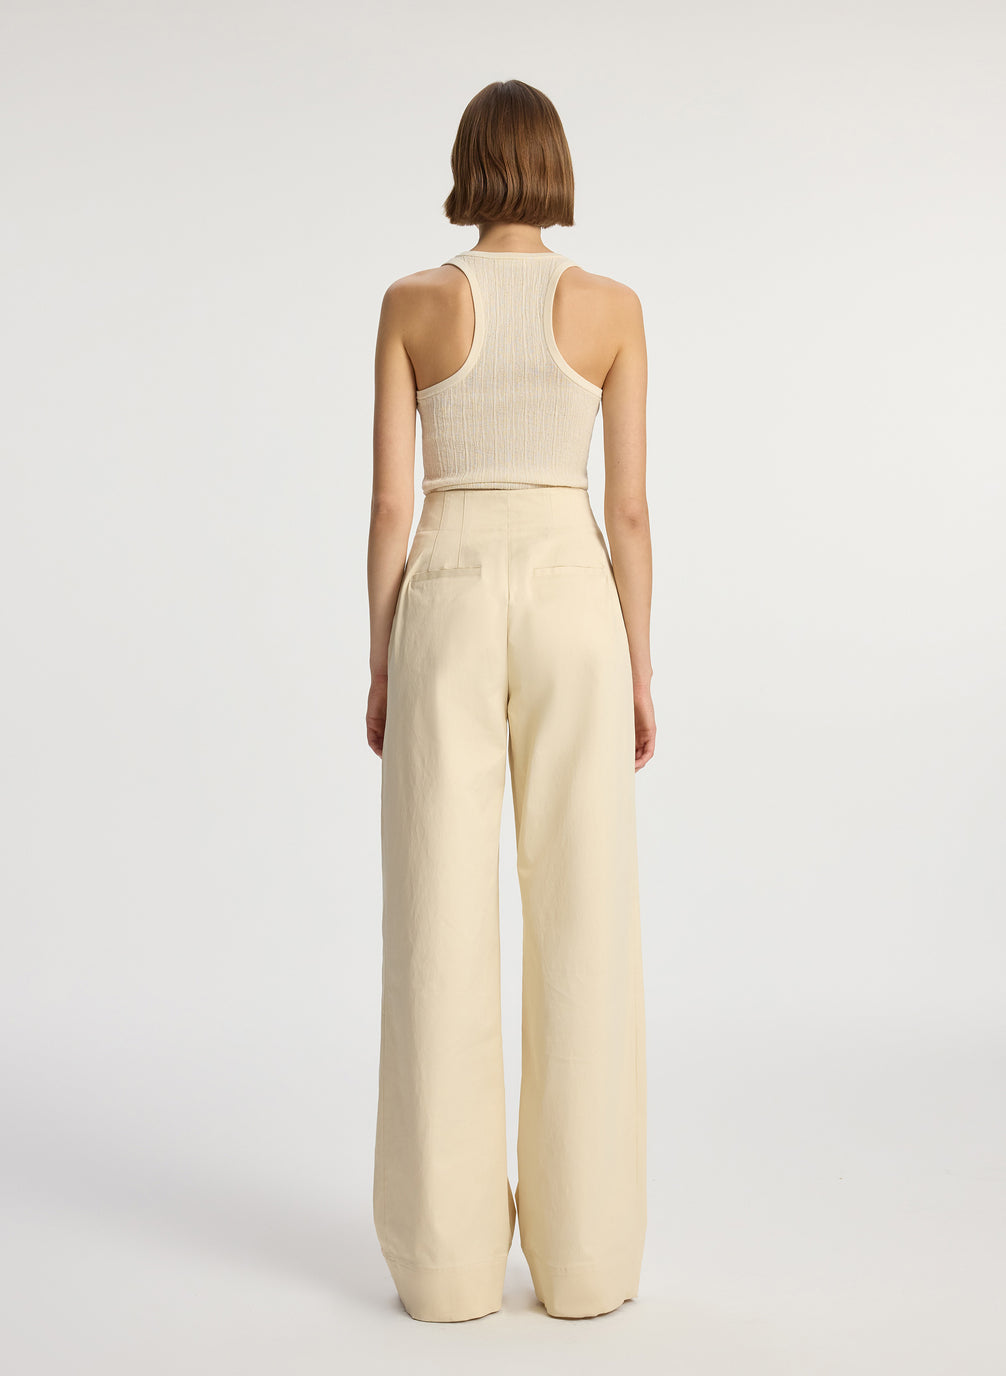 back  view of woman wearing cream tank top and beige sateen wide leg pants